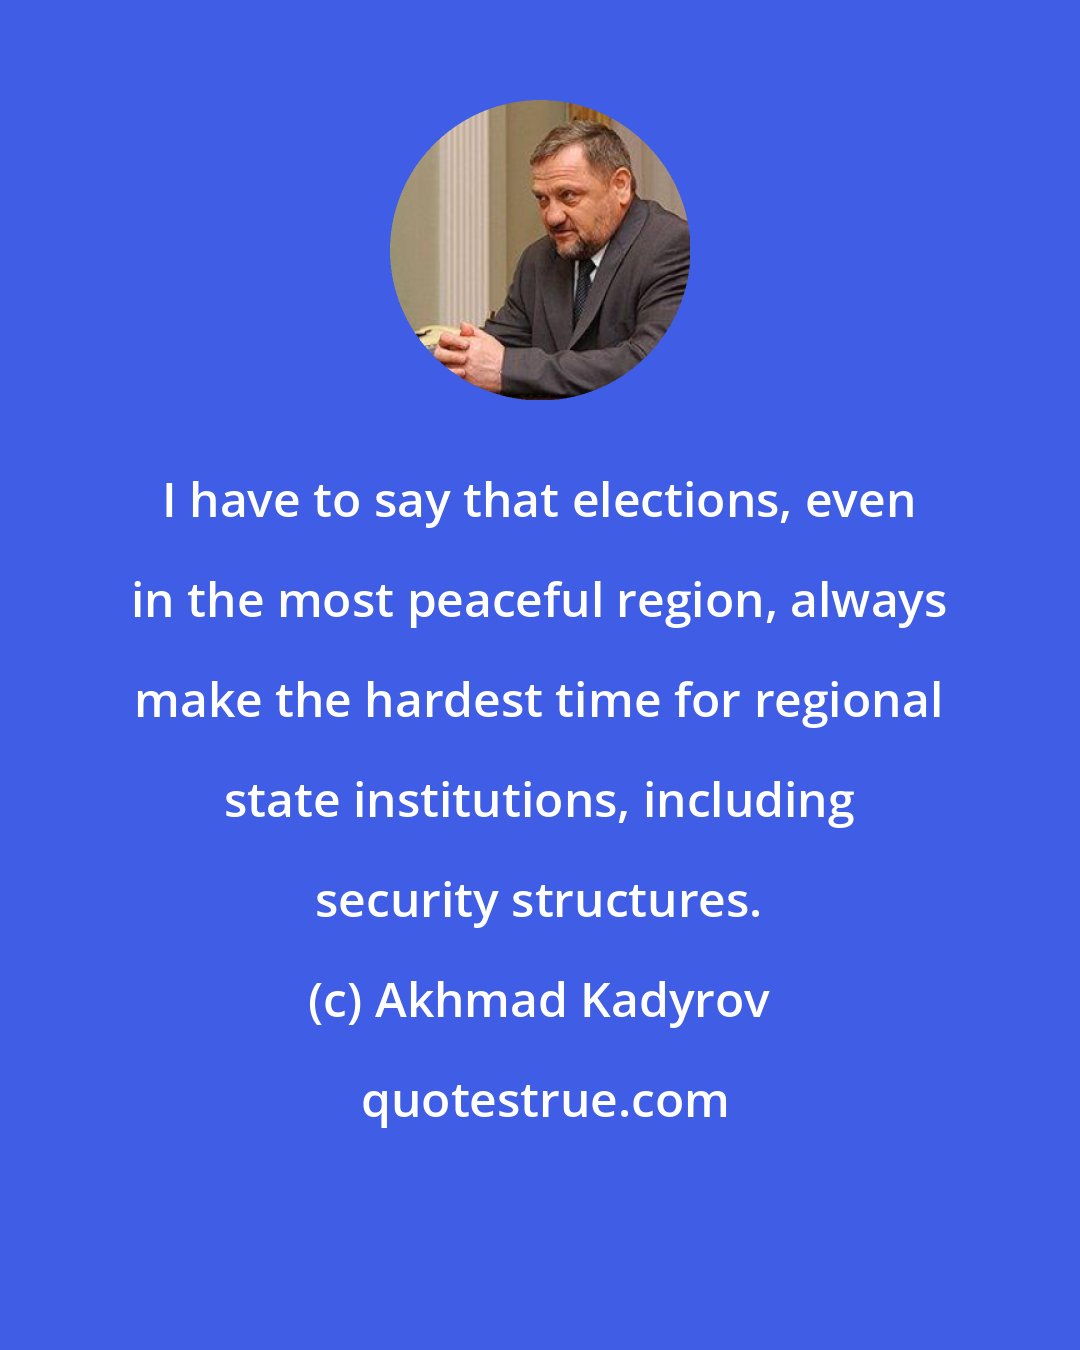 Akhmad Kadyrov: I have to say that elections, even in the most peaceful region, always make the hardest time for regional state institutions, including security structures.